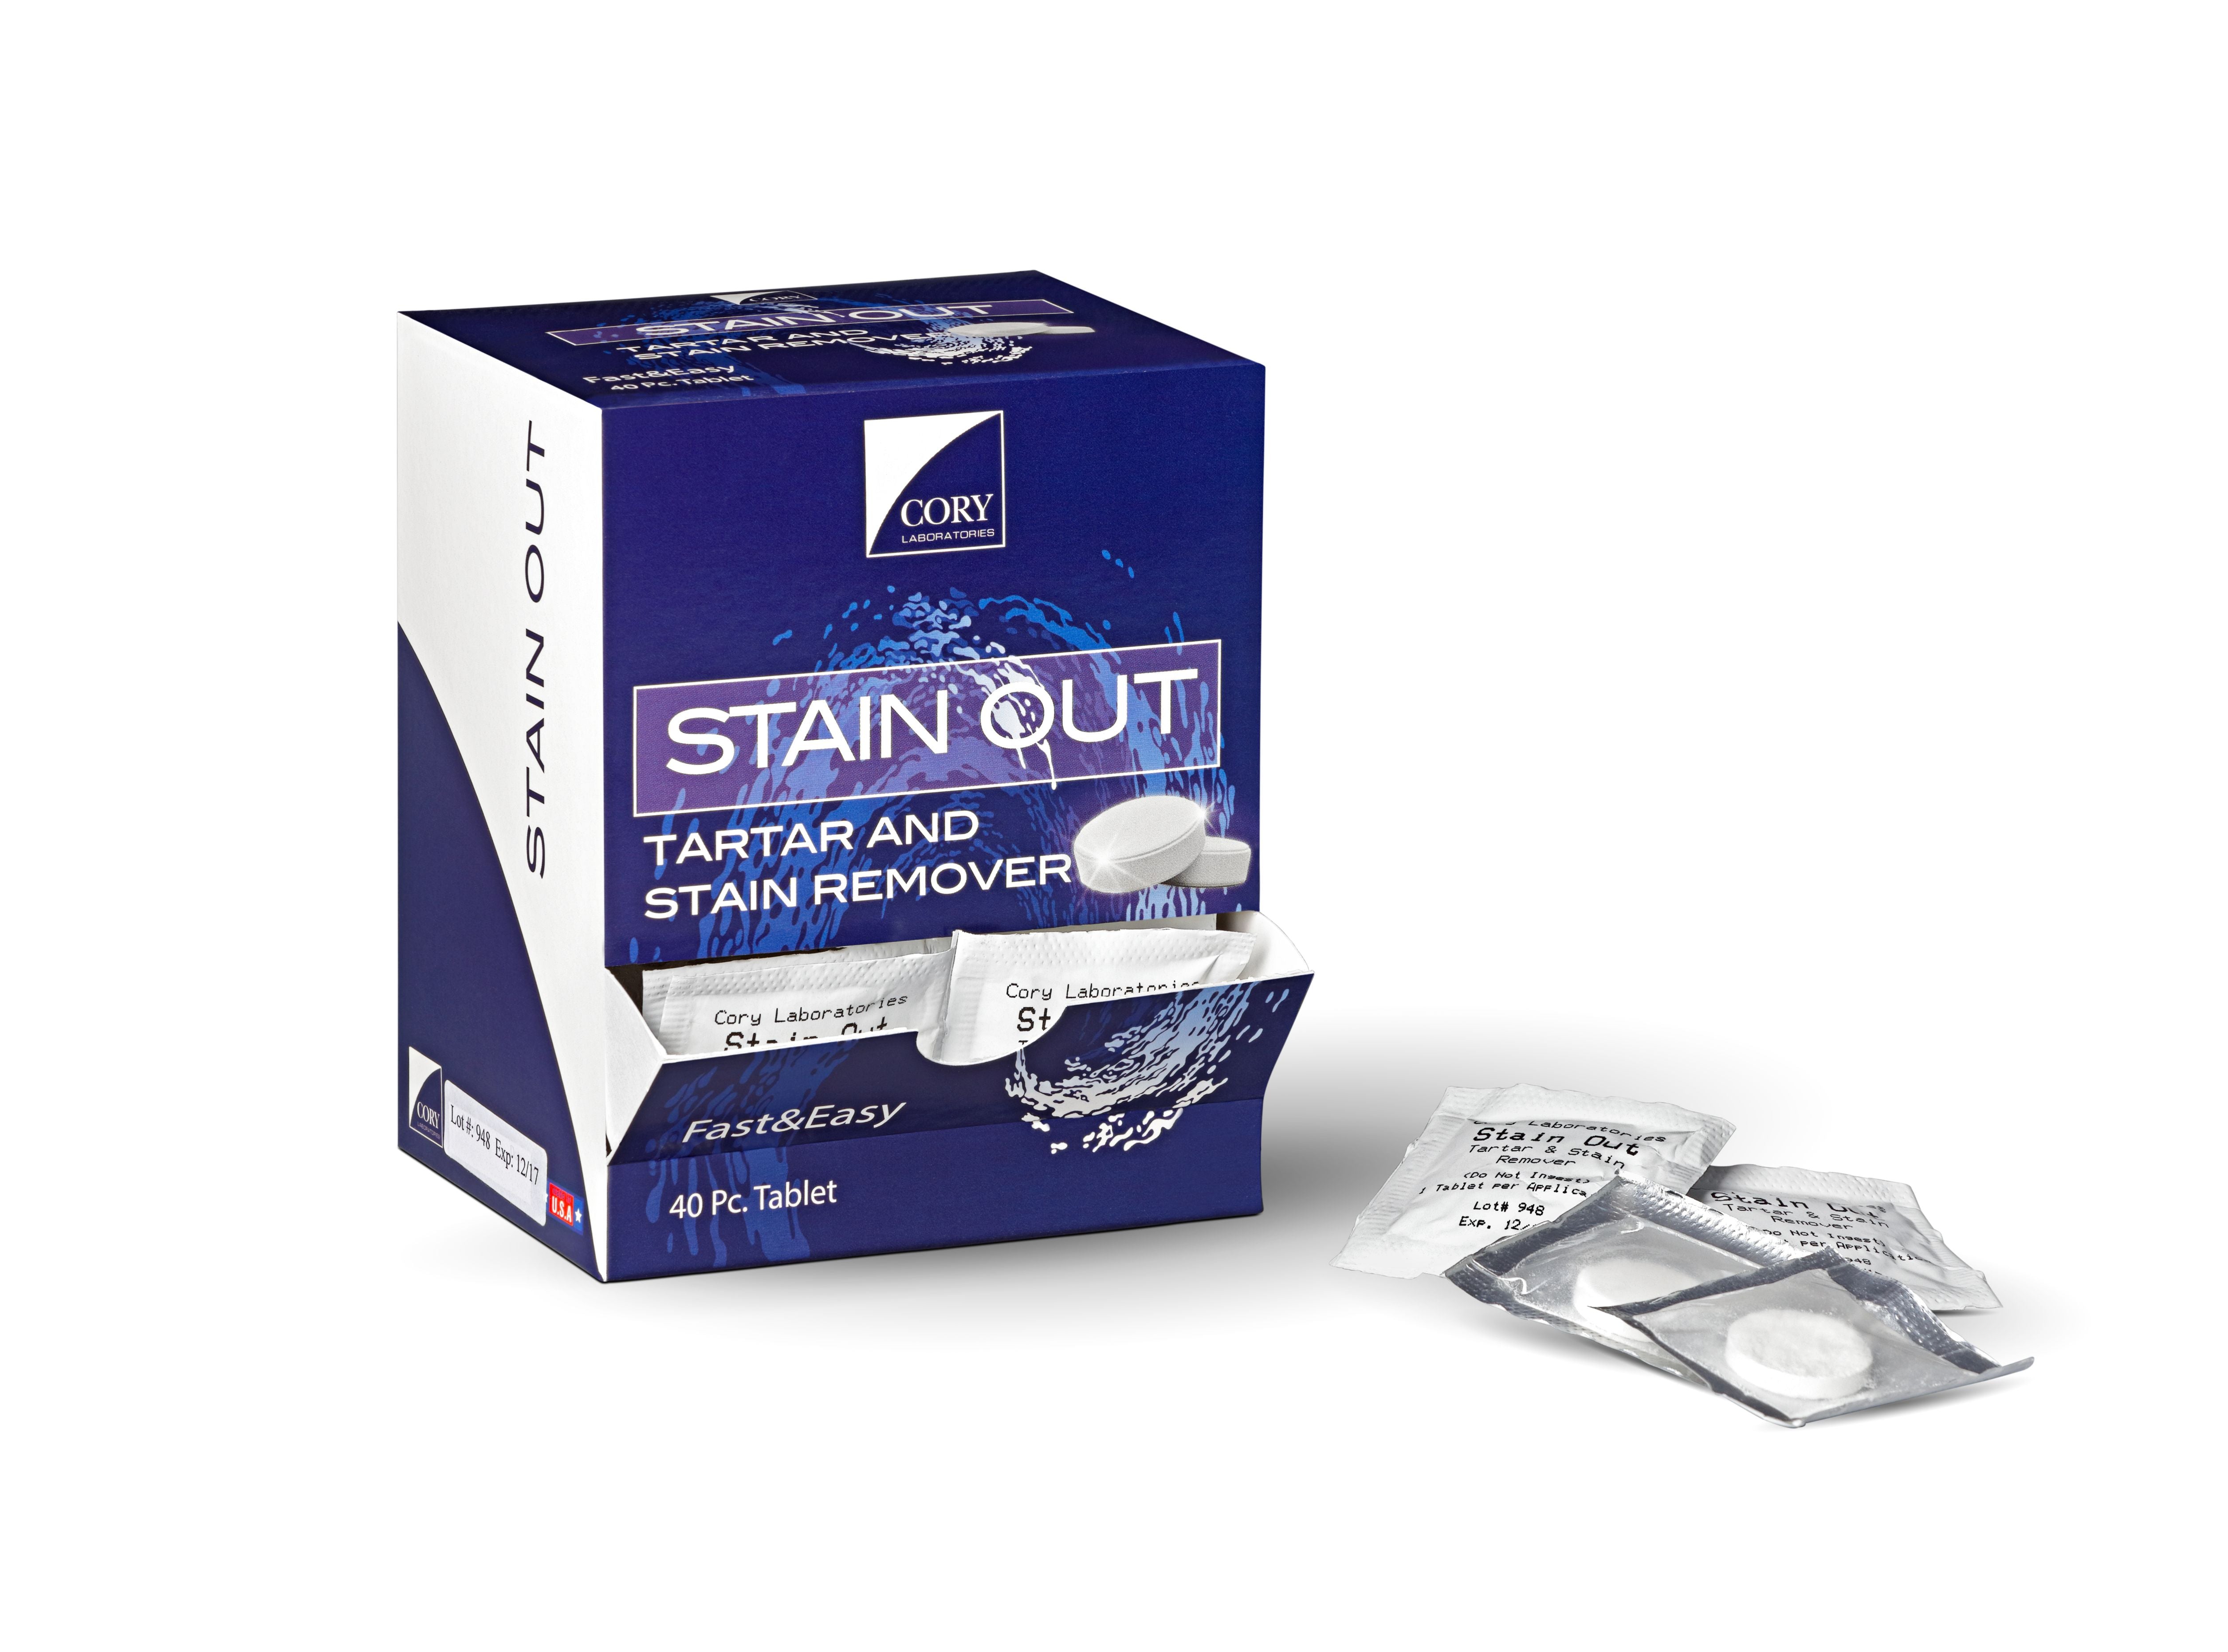 Stain Out - Tartar and Stain Remover Tablets 40/bx - Cory Labs